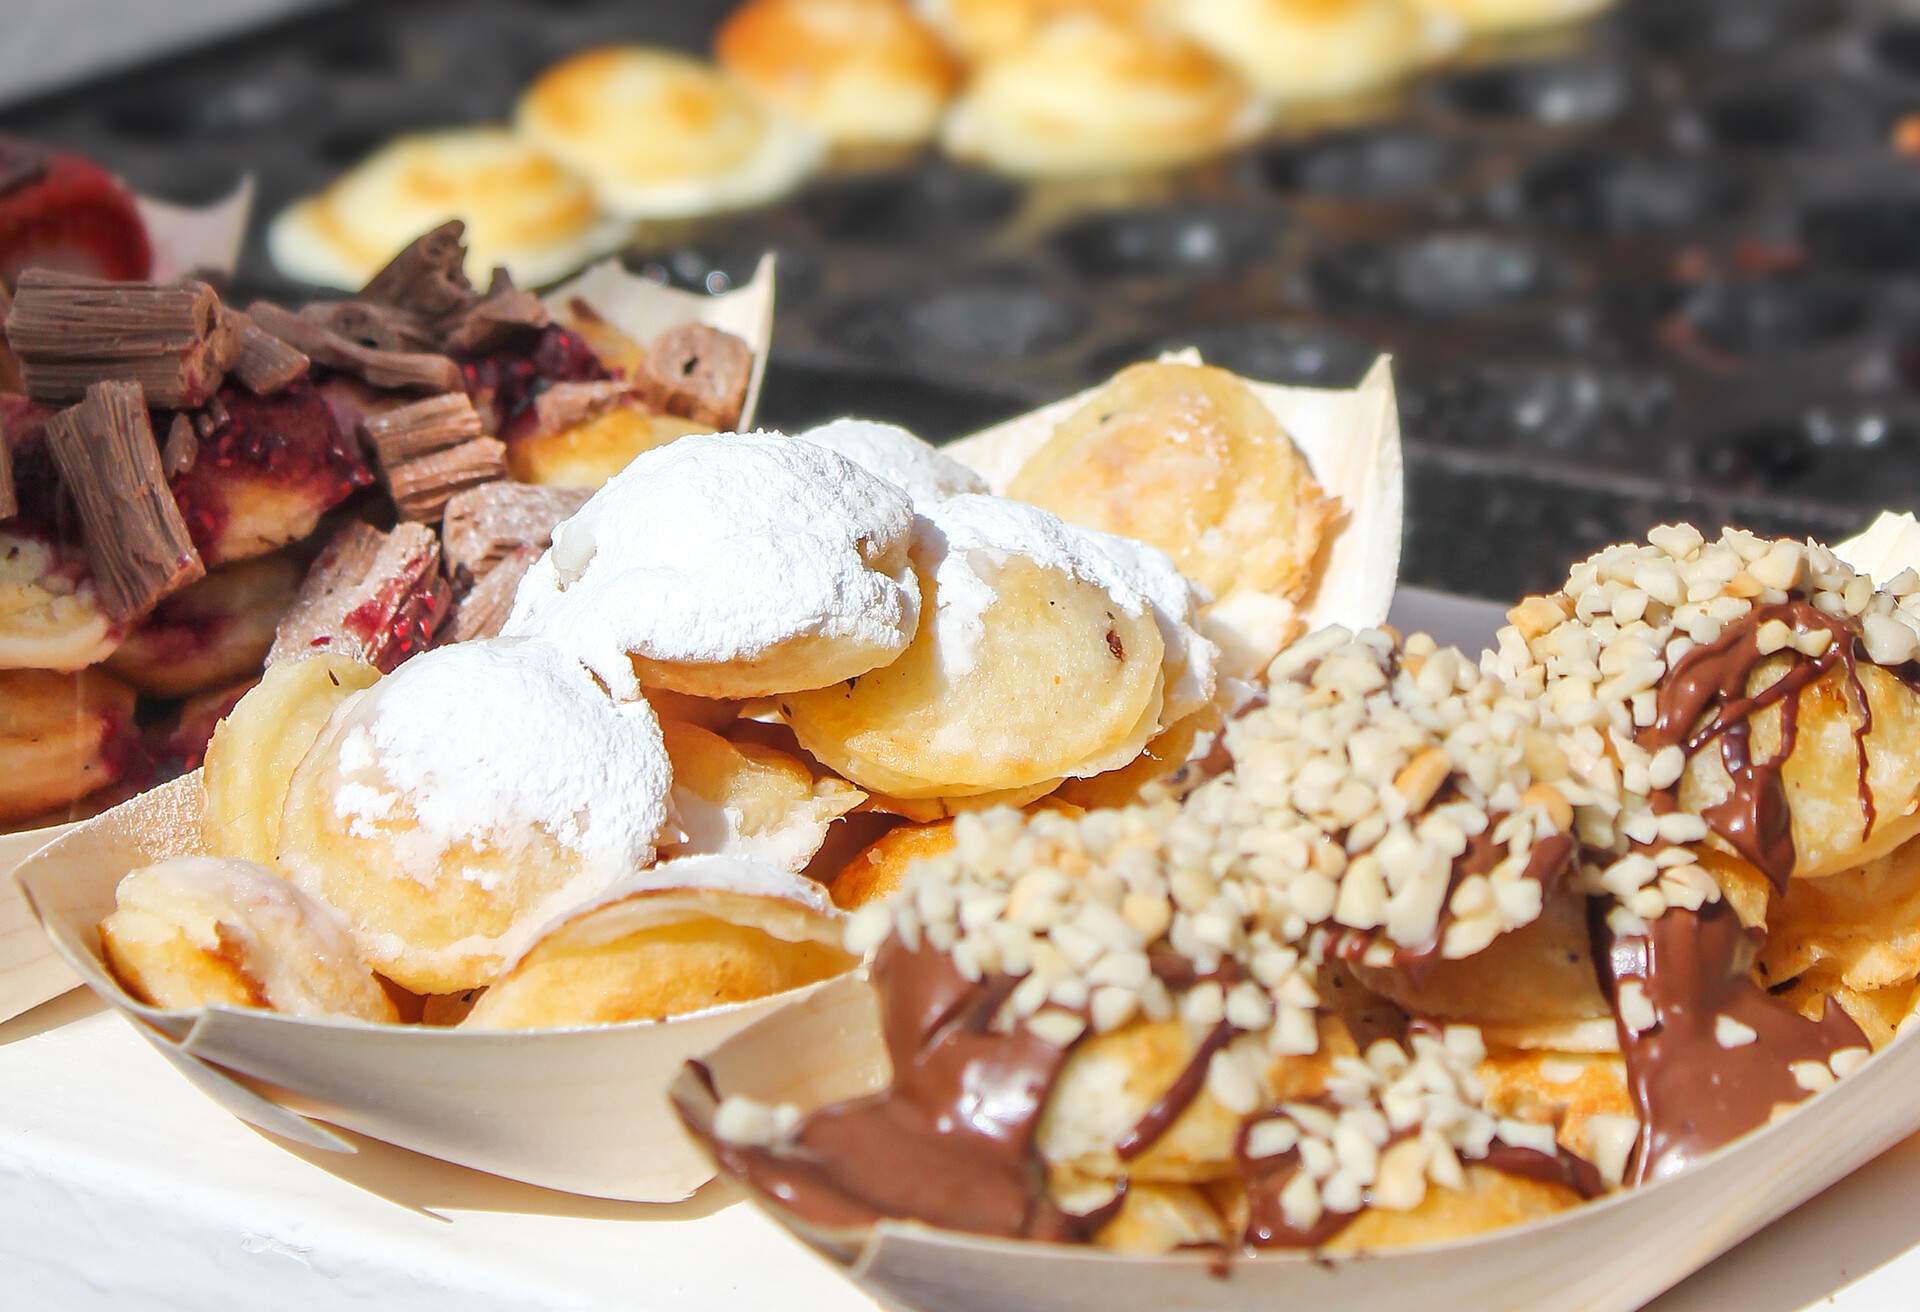 A tempting assortment of sweet Dutch pancakes is adorned with a delightful array of toppings, ranging from a dusting of powdered sugar to a decadent chocolate peanut sauce.